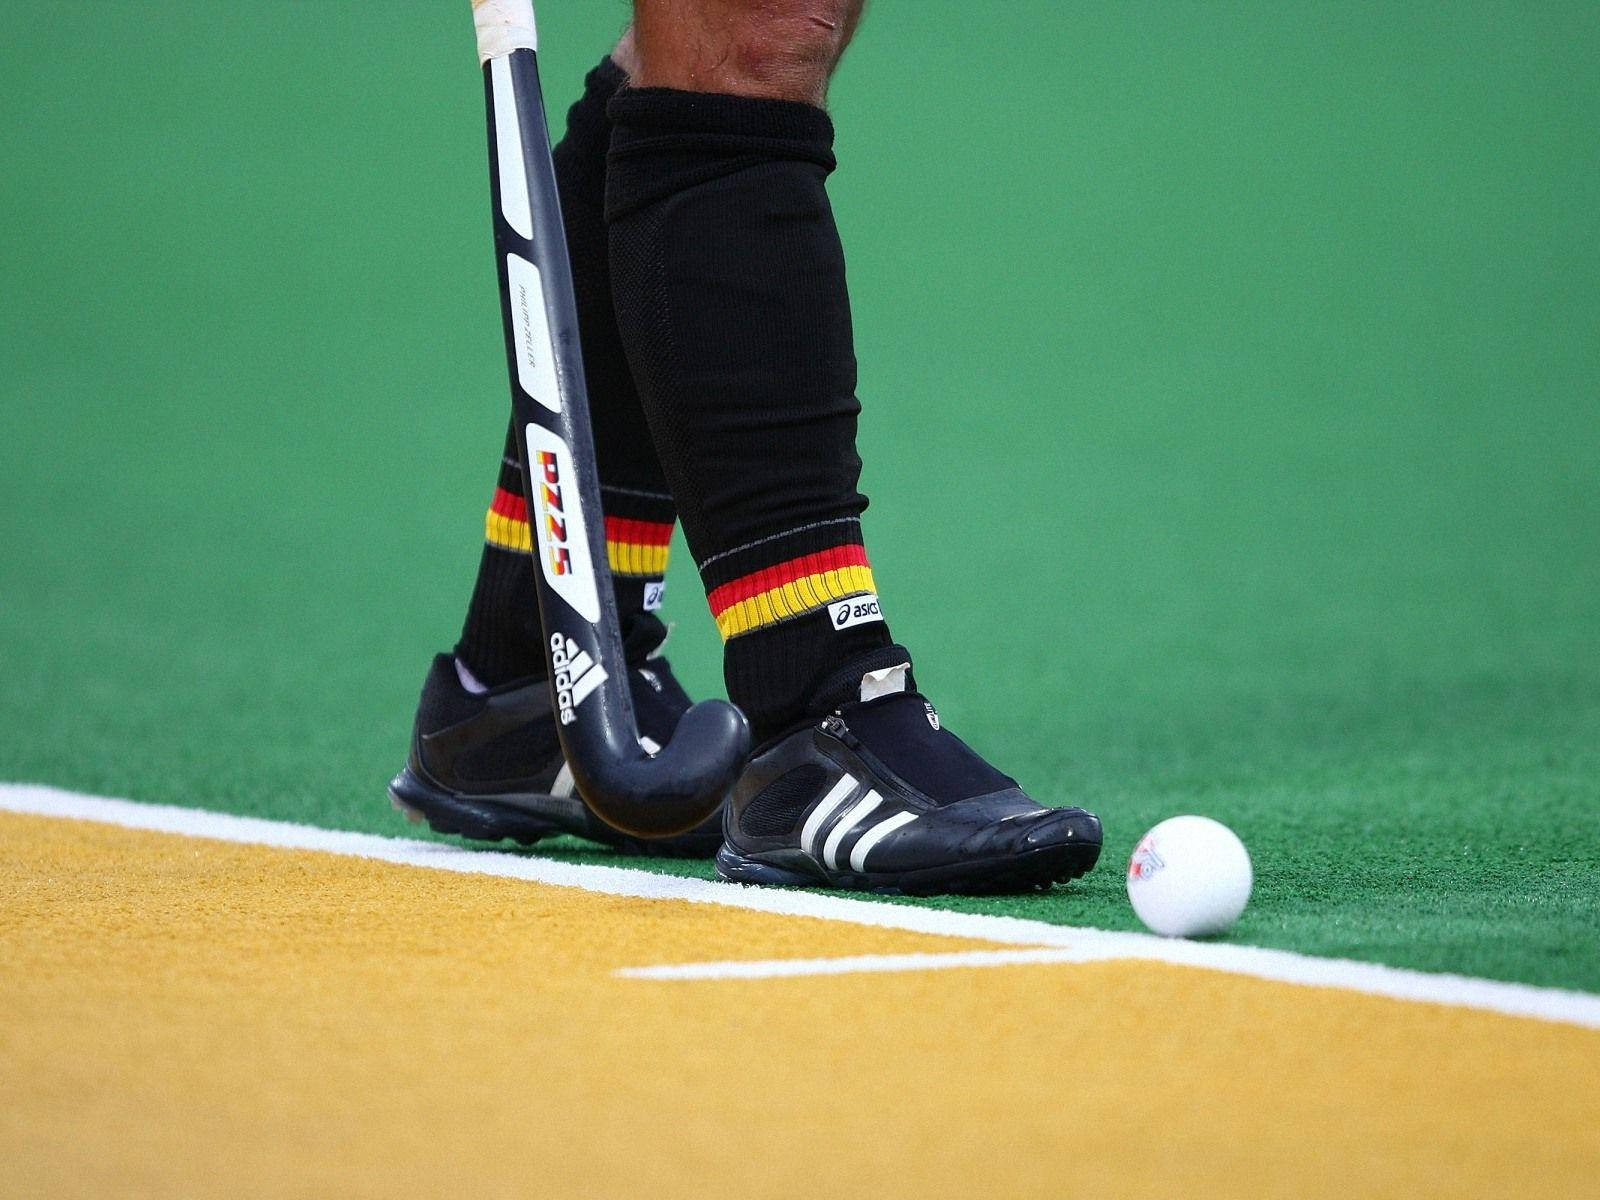 Field Hockey Shoes Background